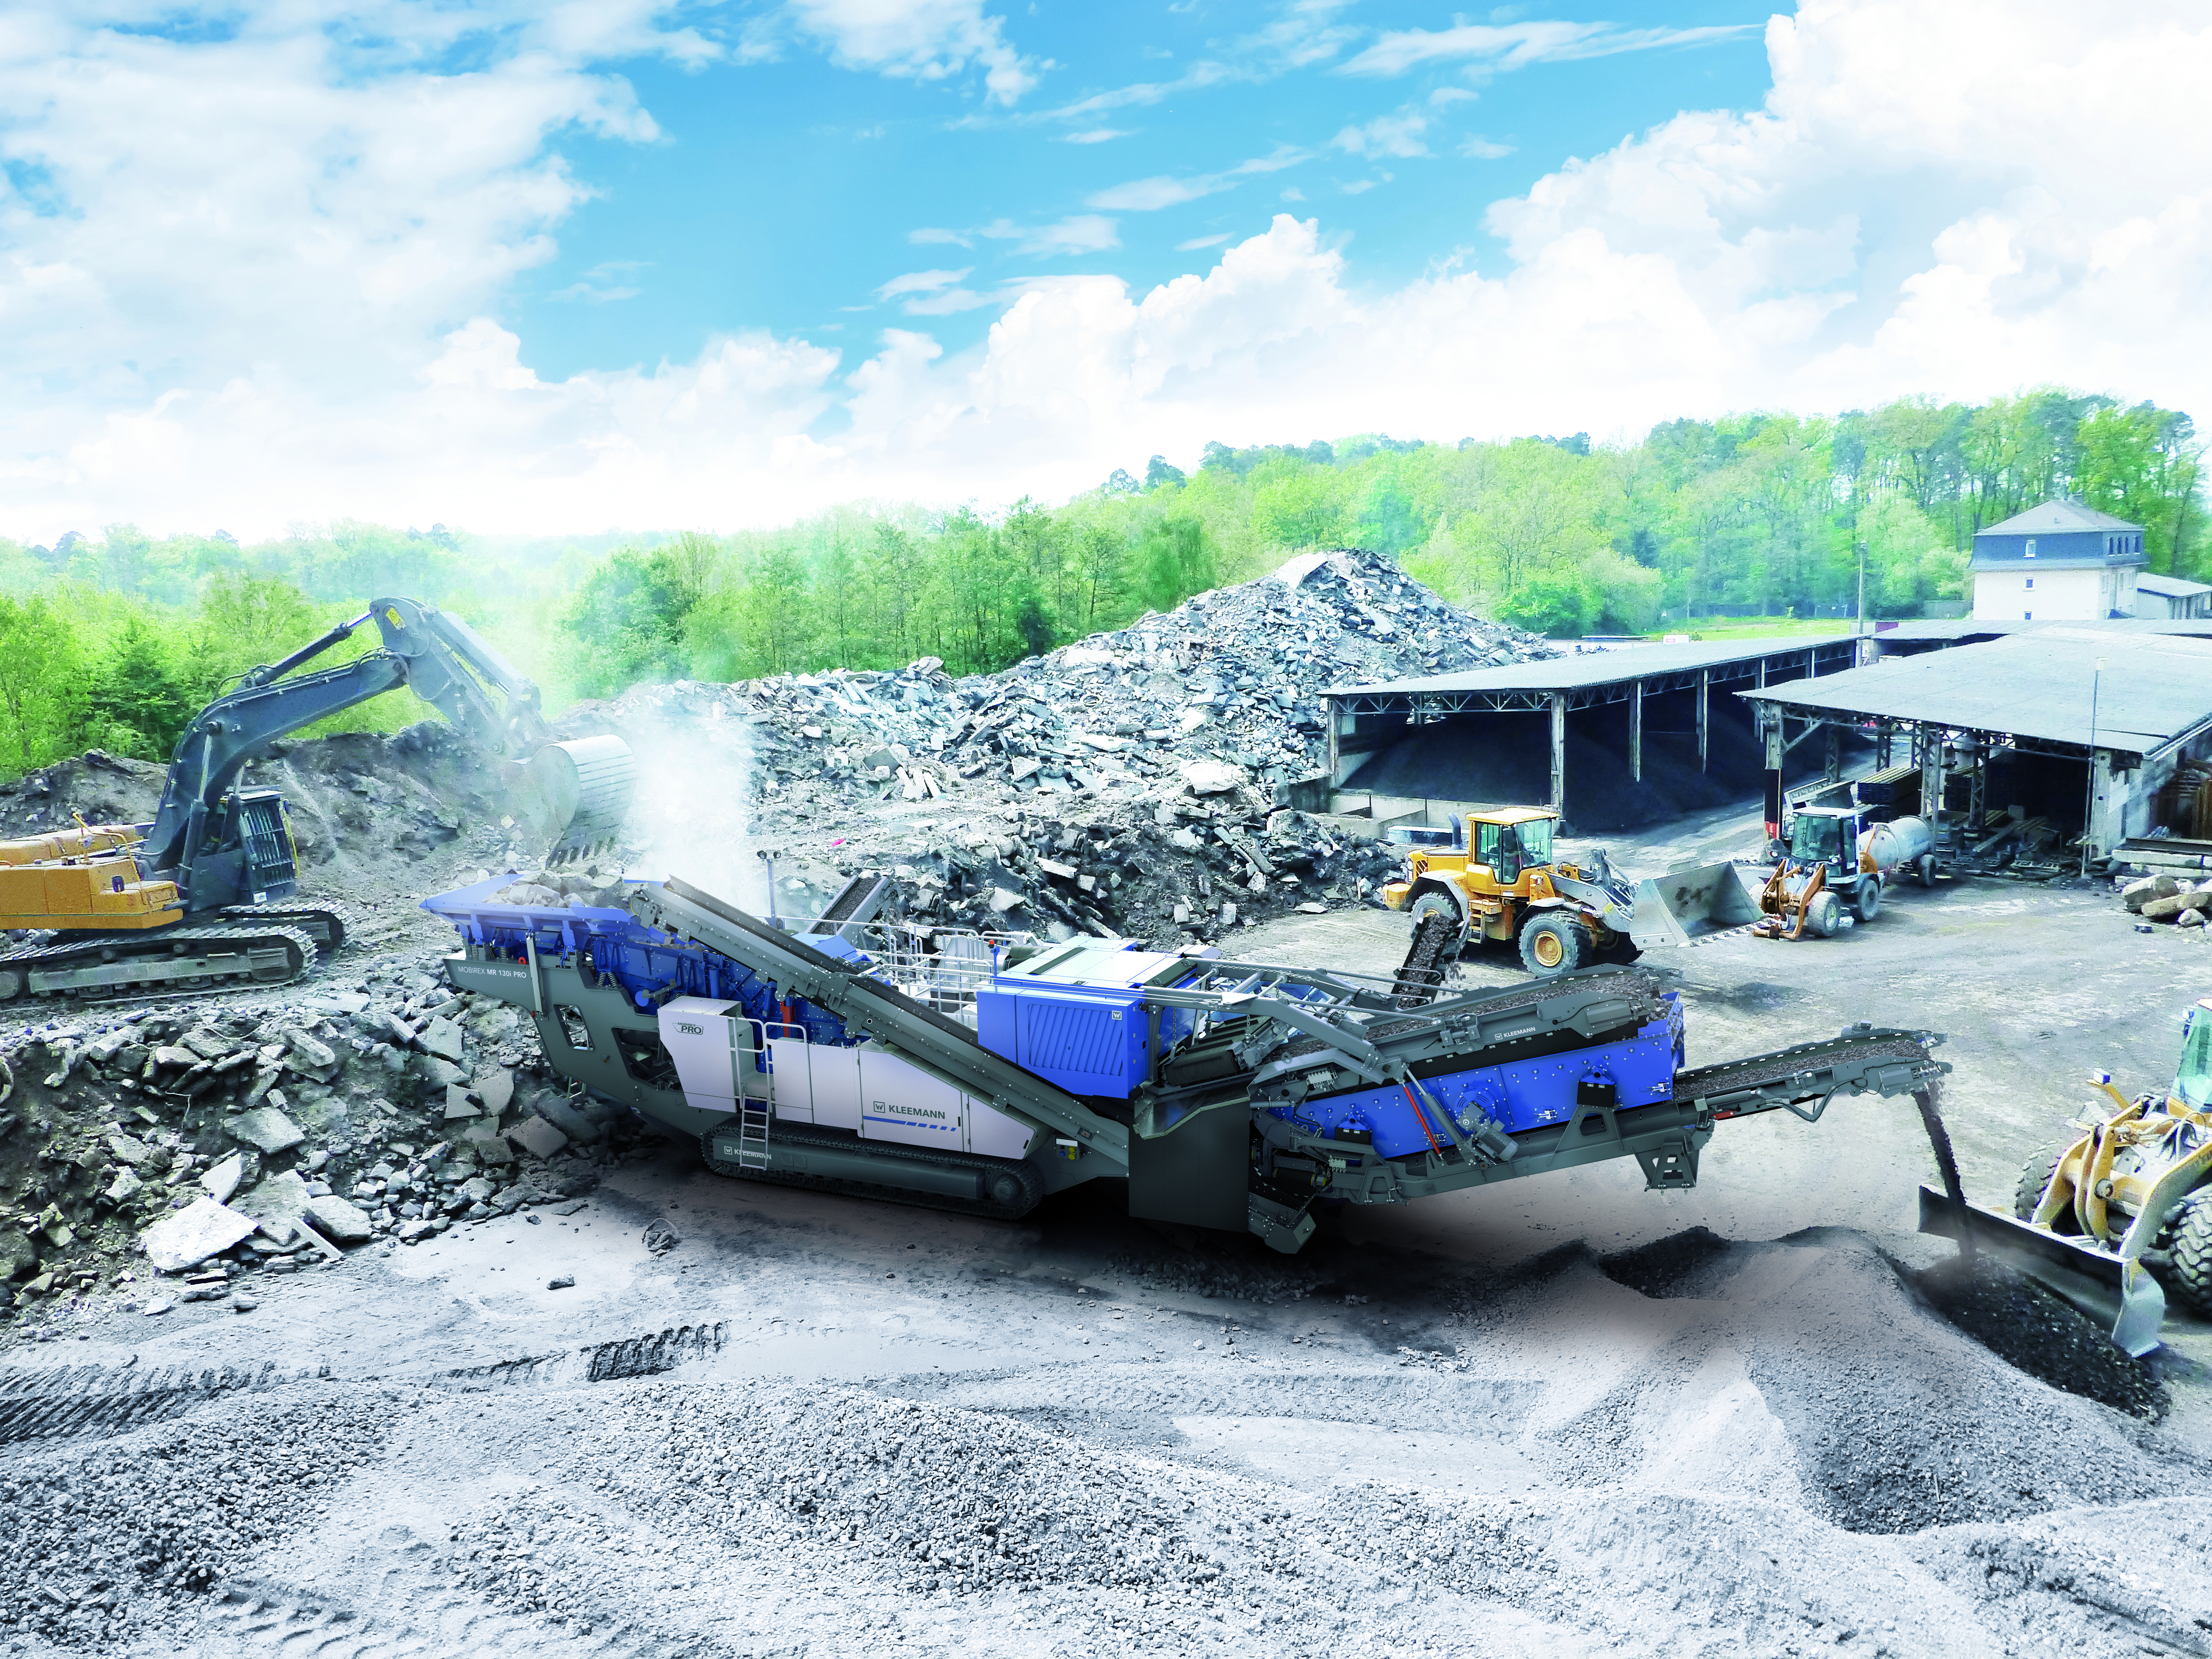 The preconditions for using a Kleemann crushing plant with E-DRIVE are often favourable in stationary recycling. An adequate power supply is often available, even occasionally from an in-company photovoltaic system. Pic: Kleemann